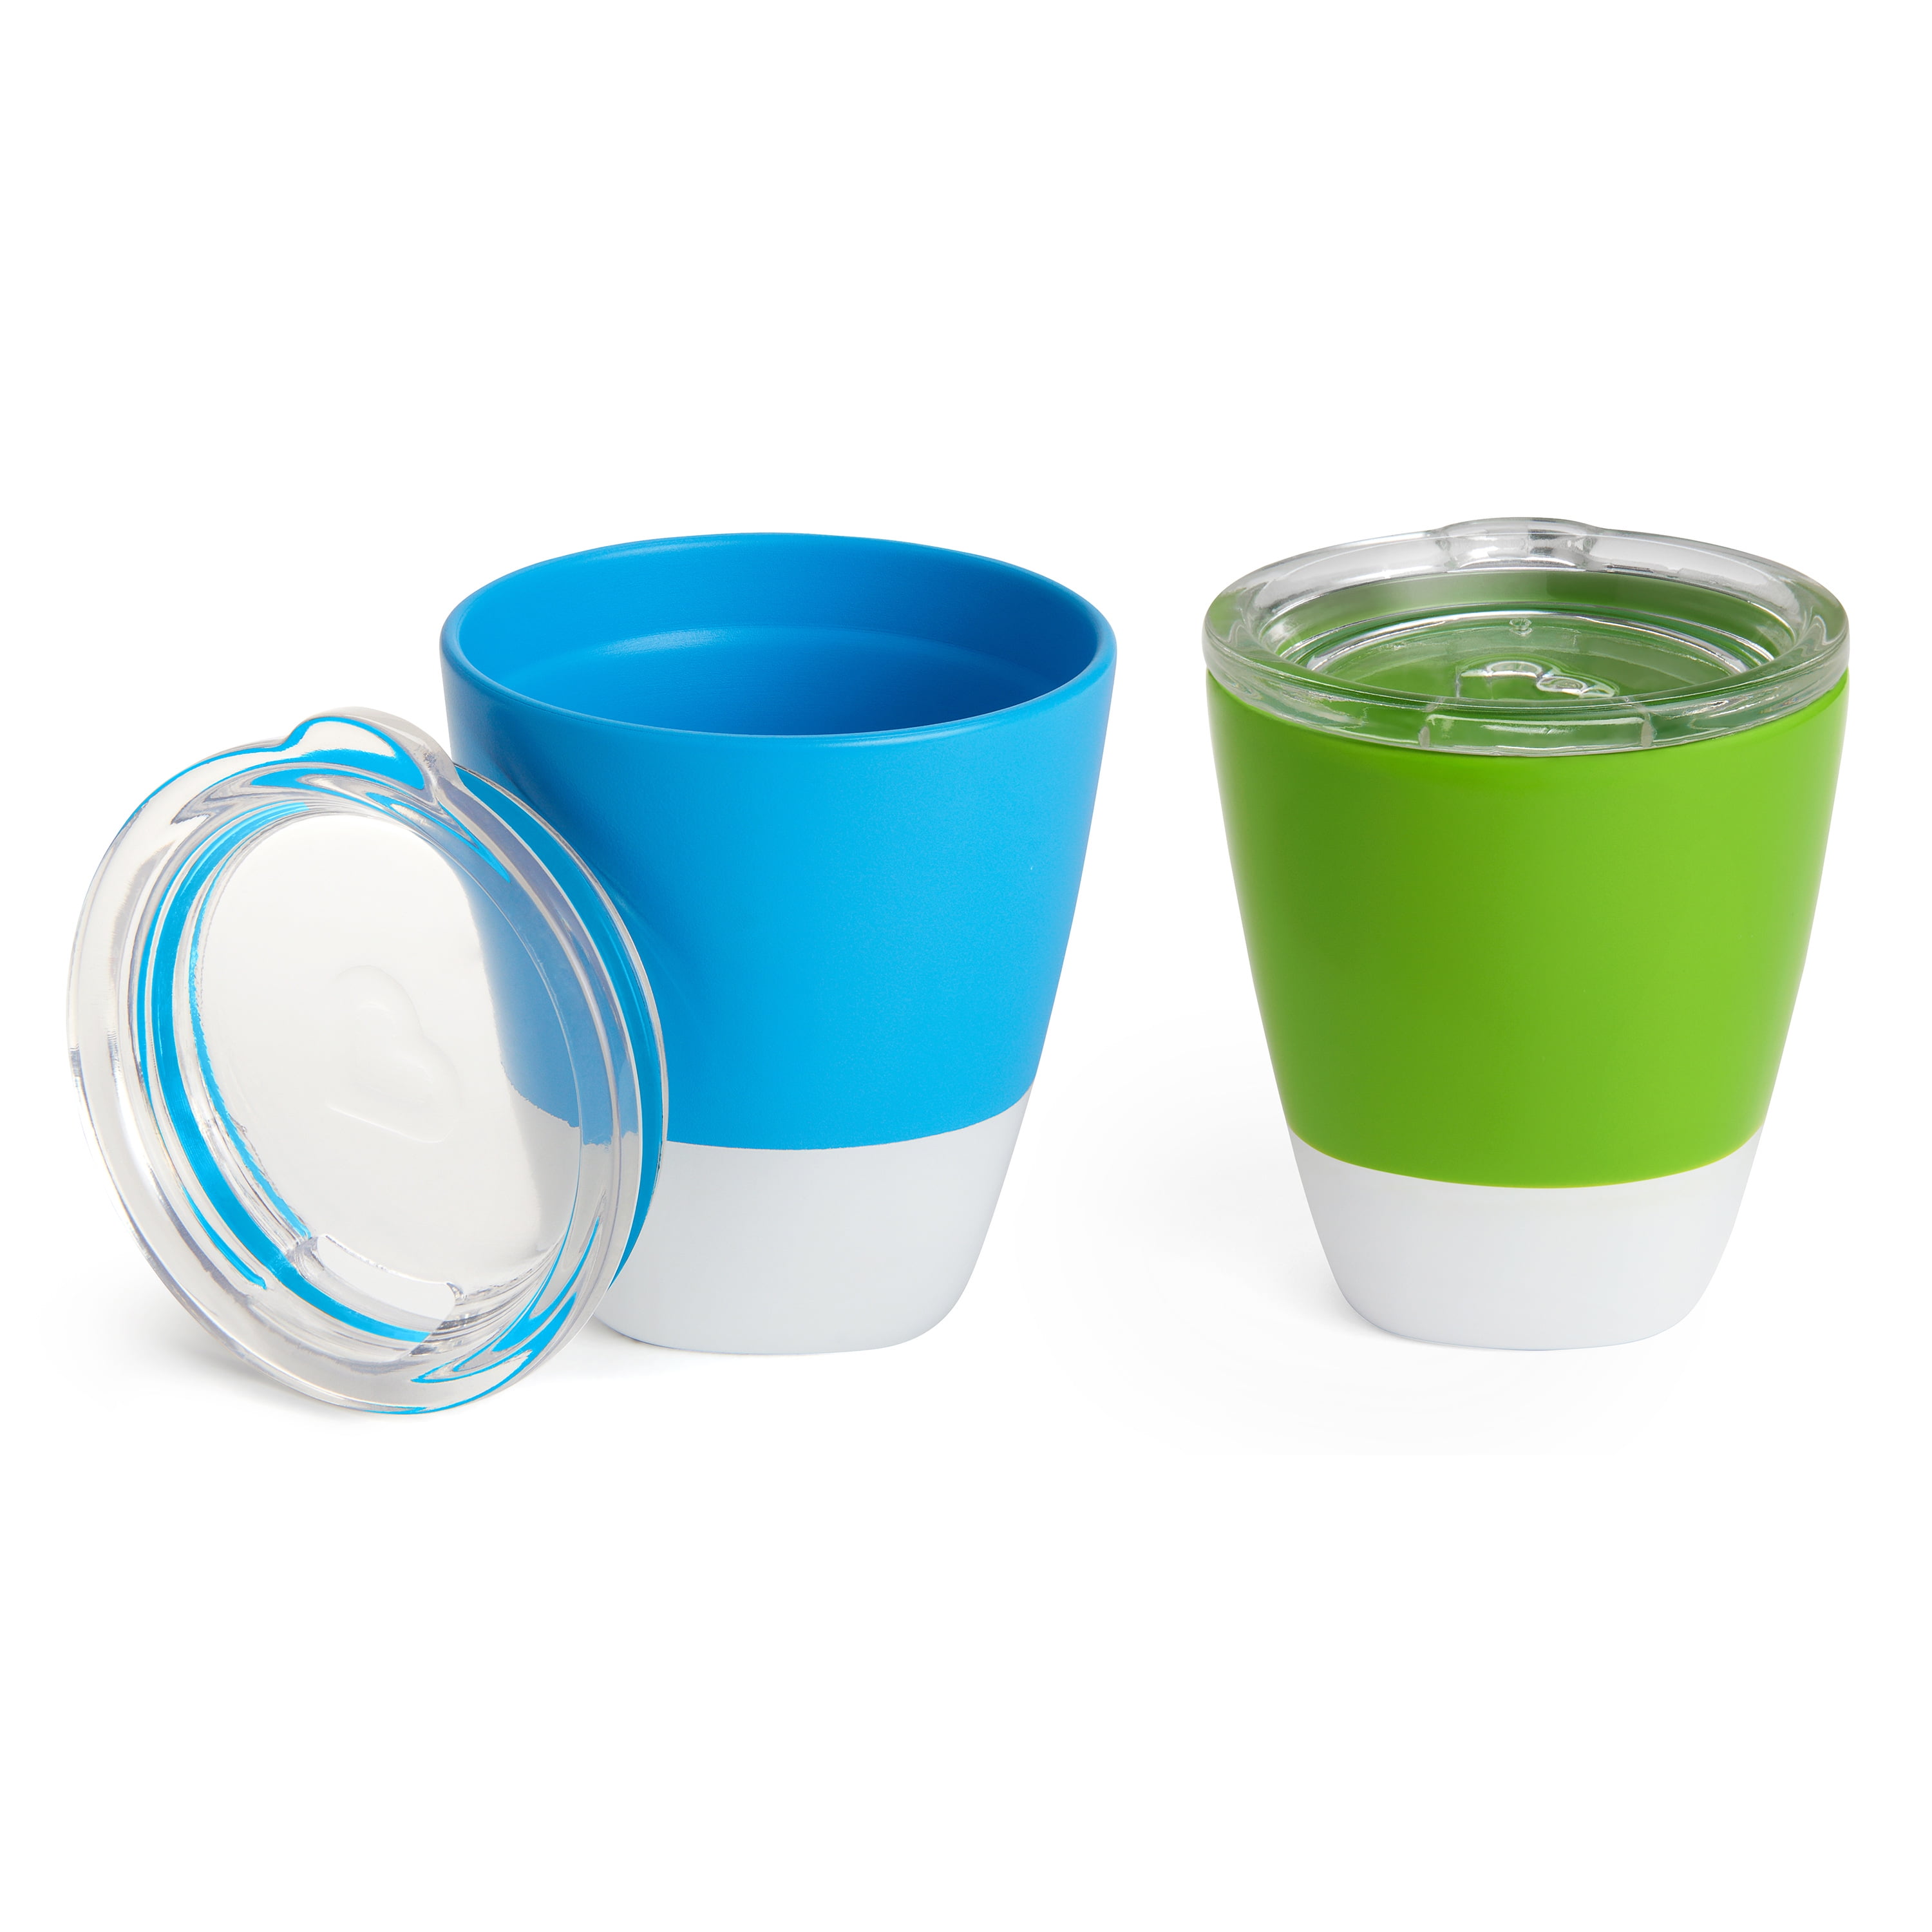 Munchkin® Multi™ Open Training Toddler Cups, 8 Ounce, 4 Pack